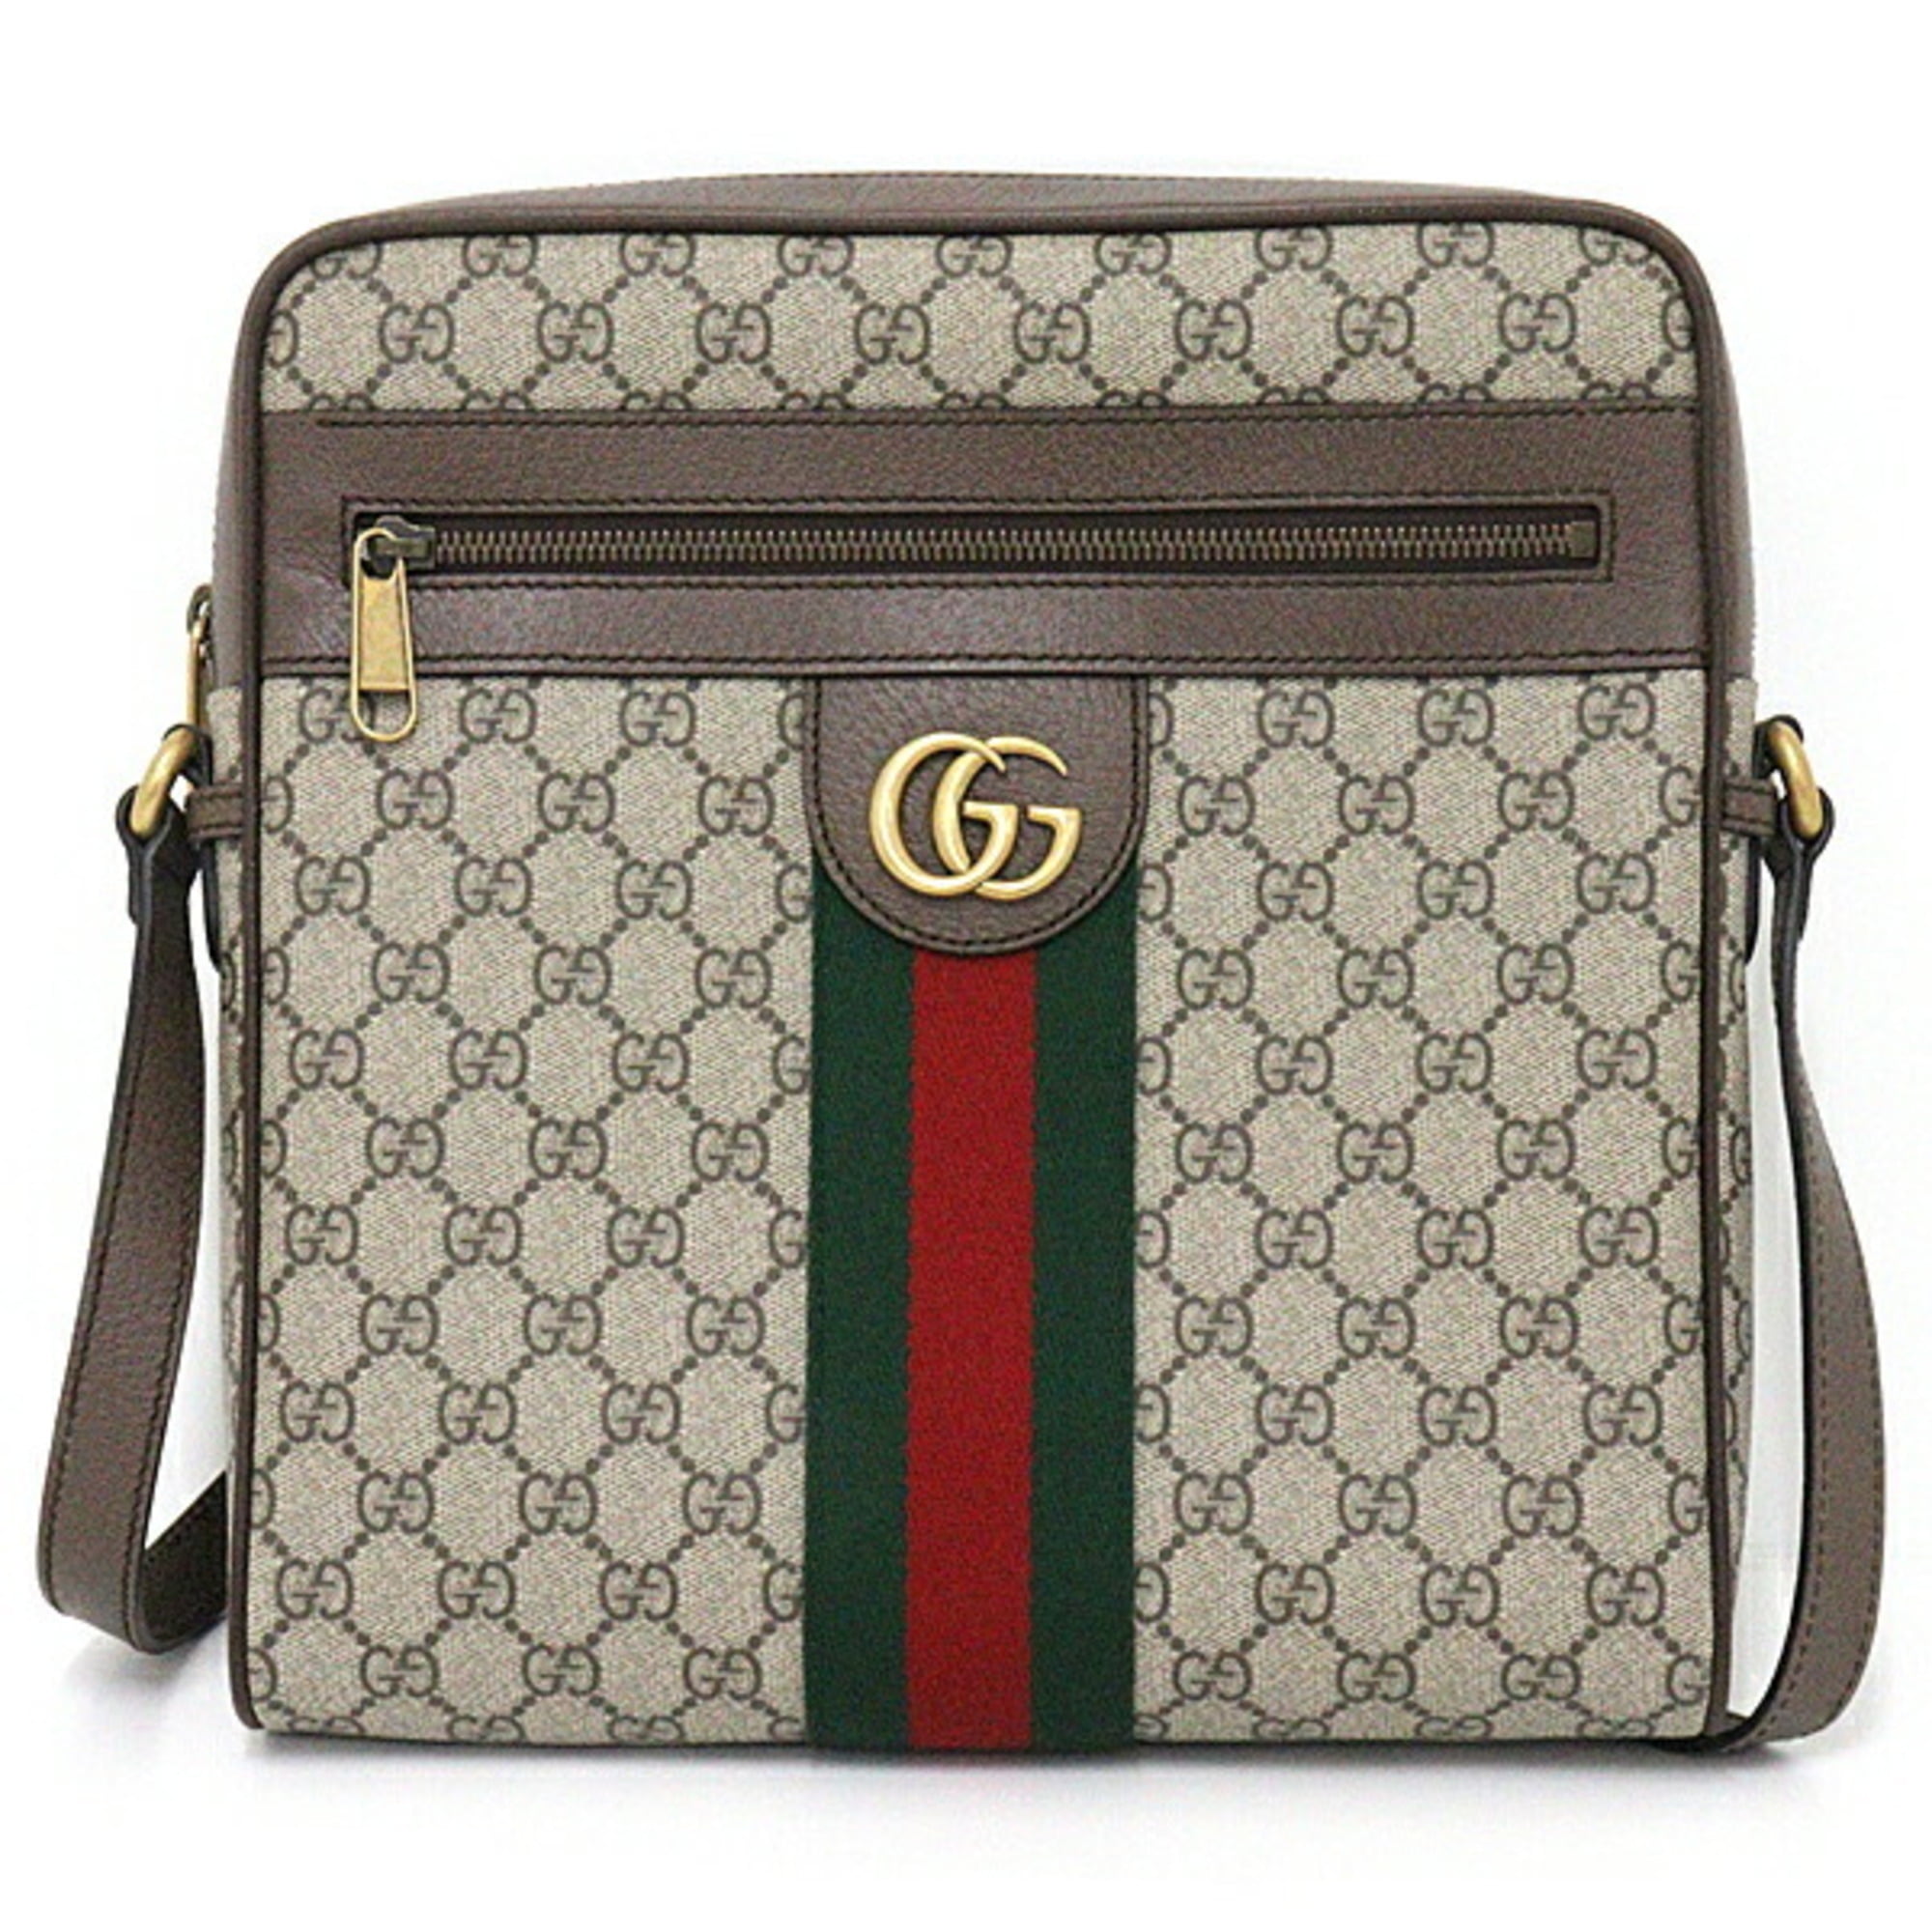 Gucci Ophidia Womens Totes, Beige